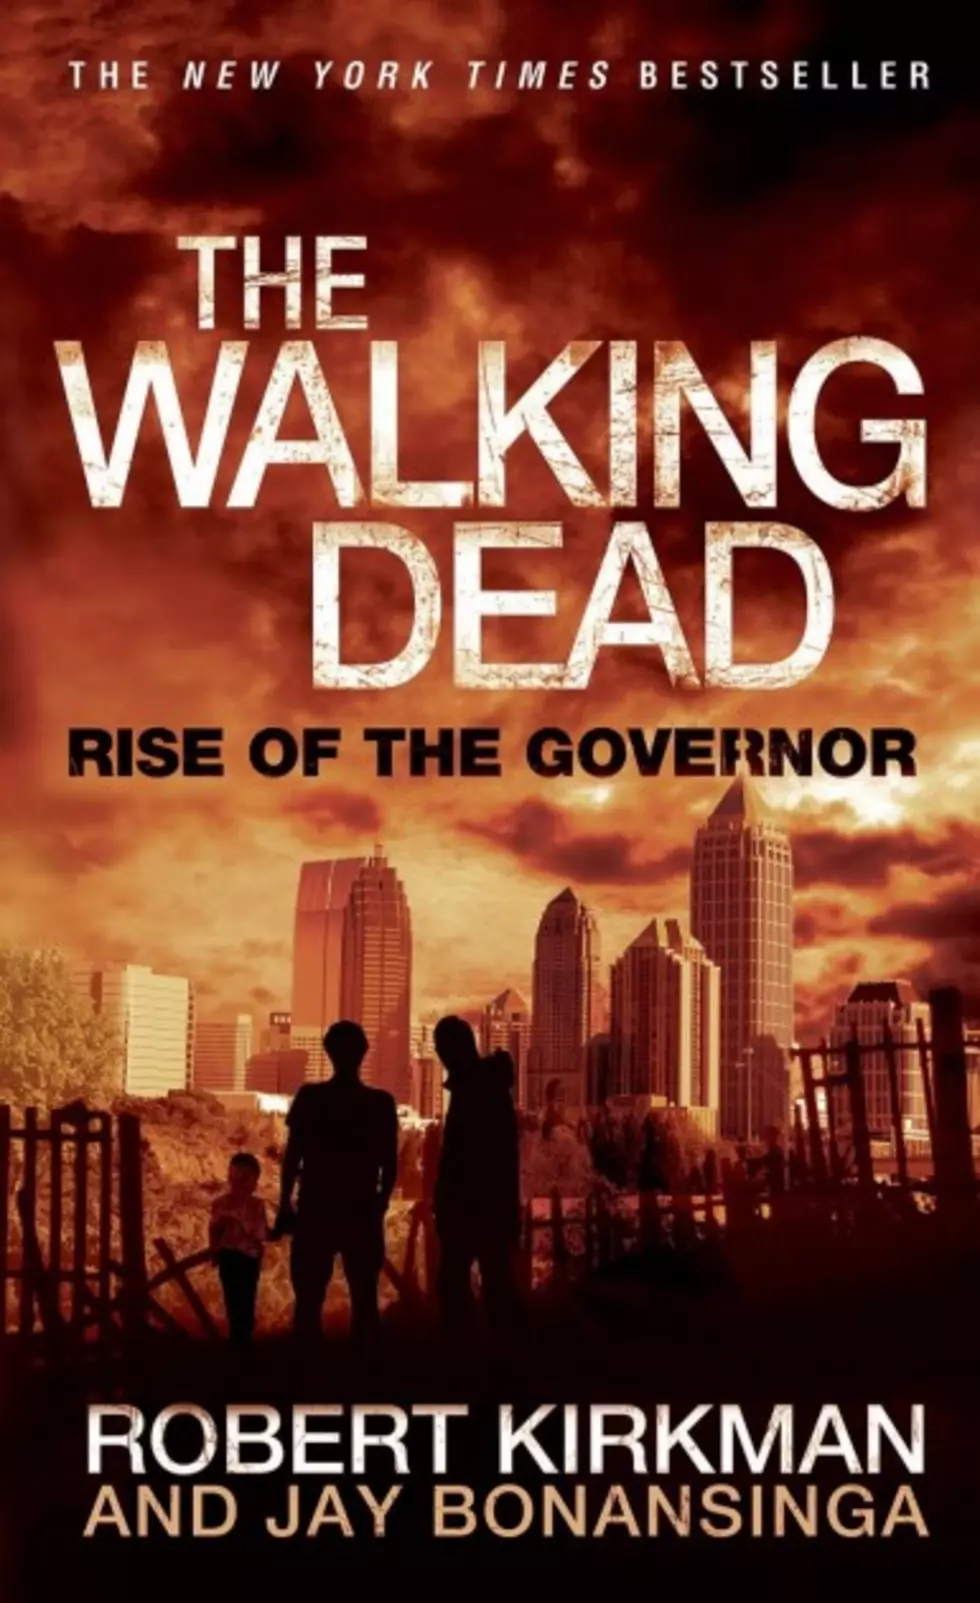 &#8216;The Walking Dead&#8217; Co-Author To Headline The Providence Literary Festival